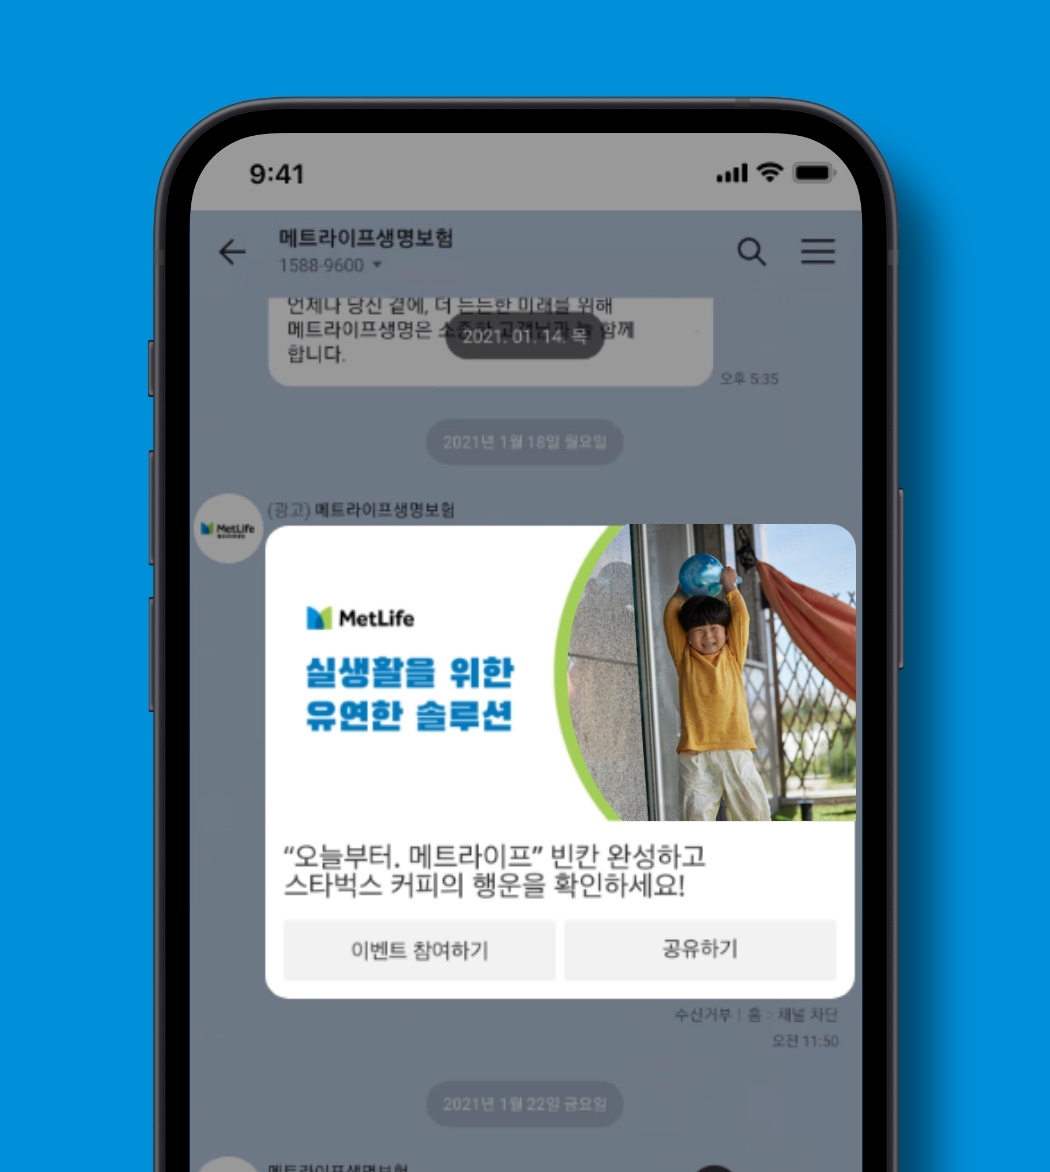 Phone screen showing branded communication on Kakao